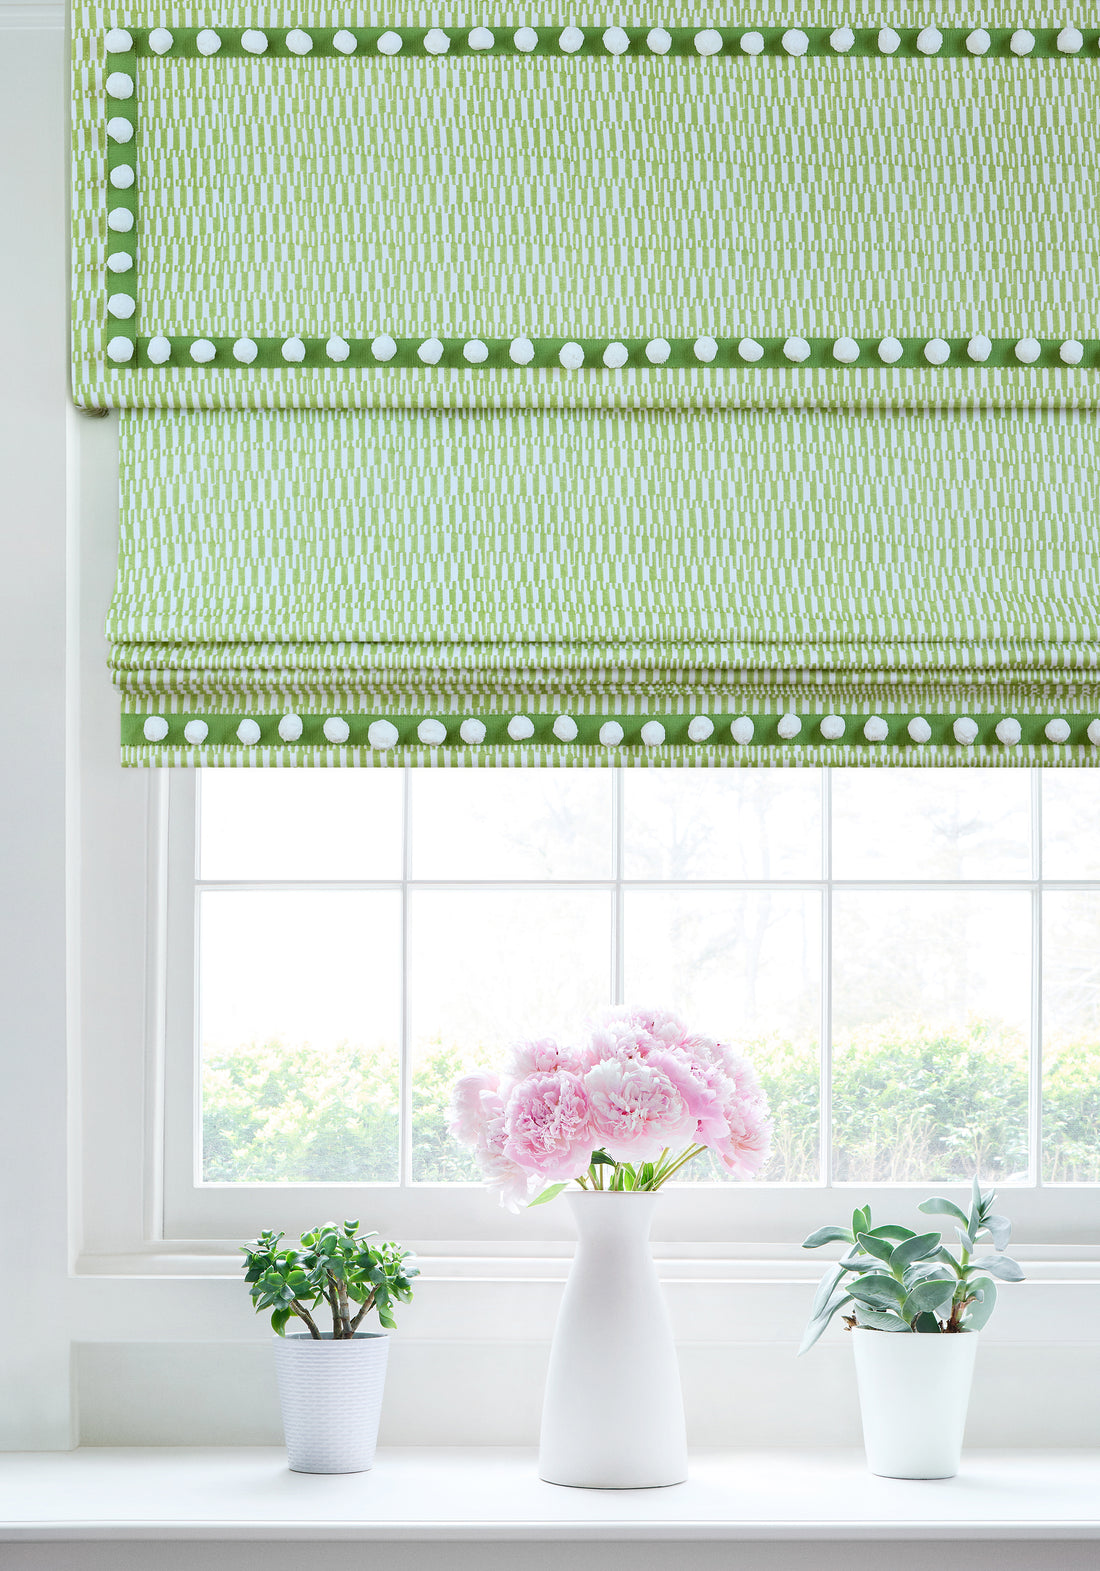 Roman shade in GoGo woven fabric in parrot green with Pom Pom Tape in kelly trim - pattern number F920800 - by Thibaut in the Eden collection